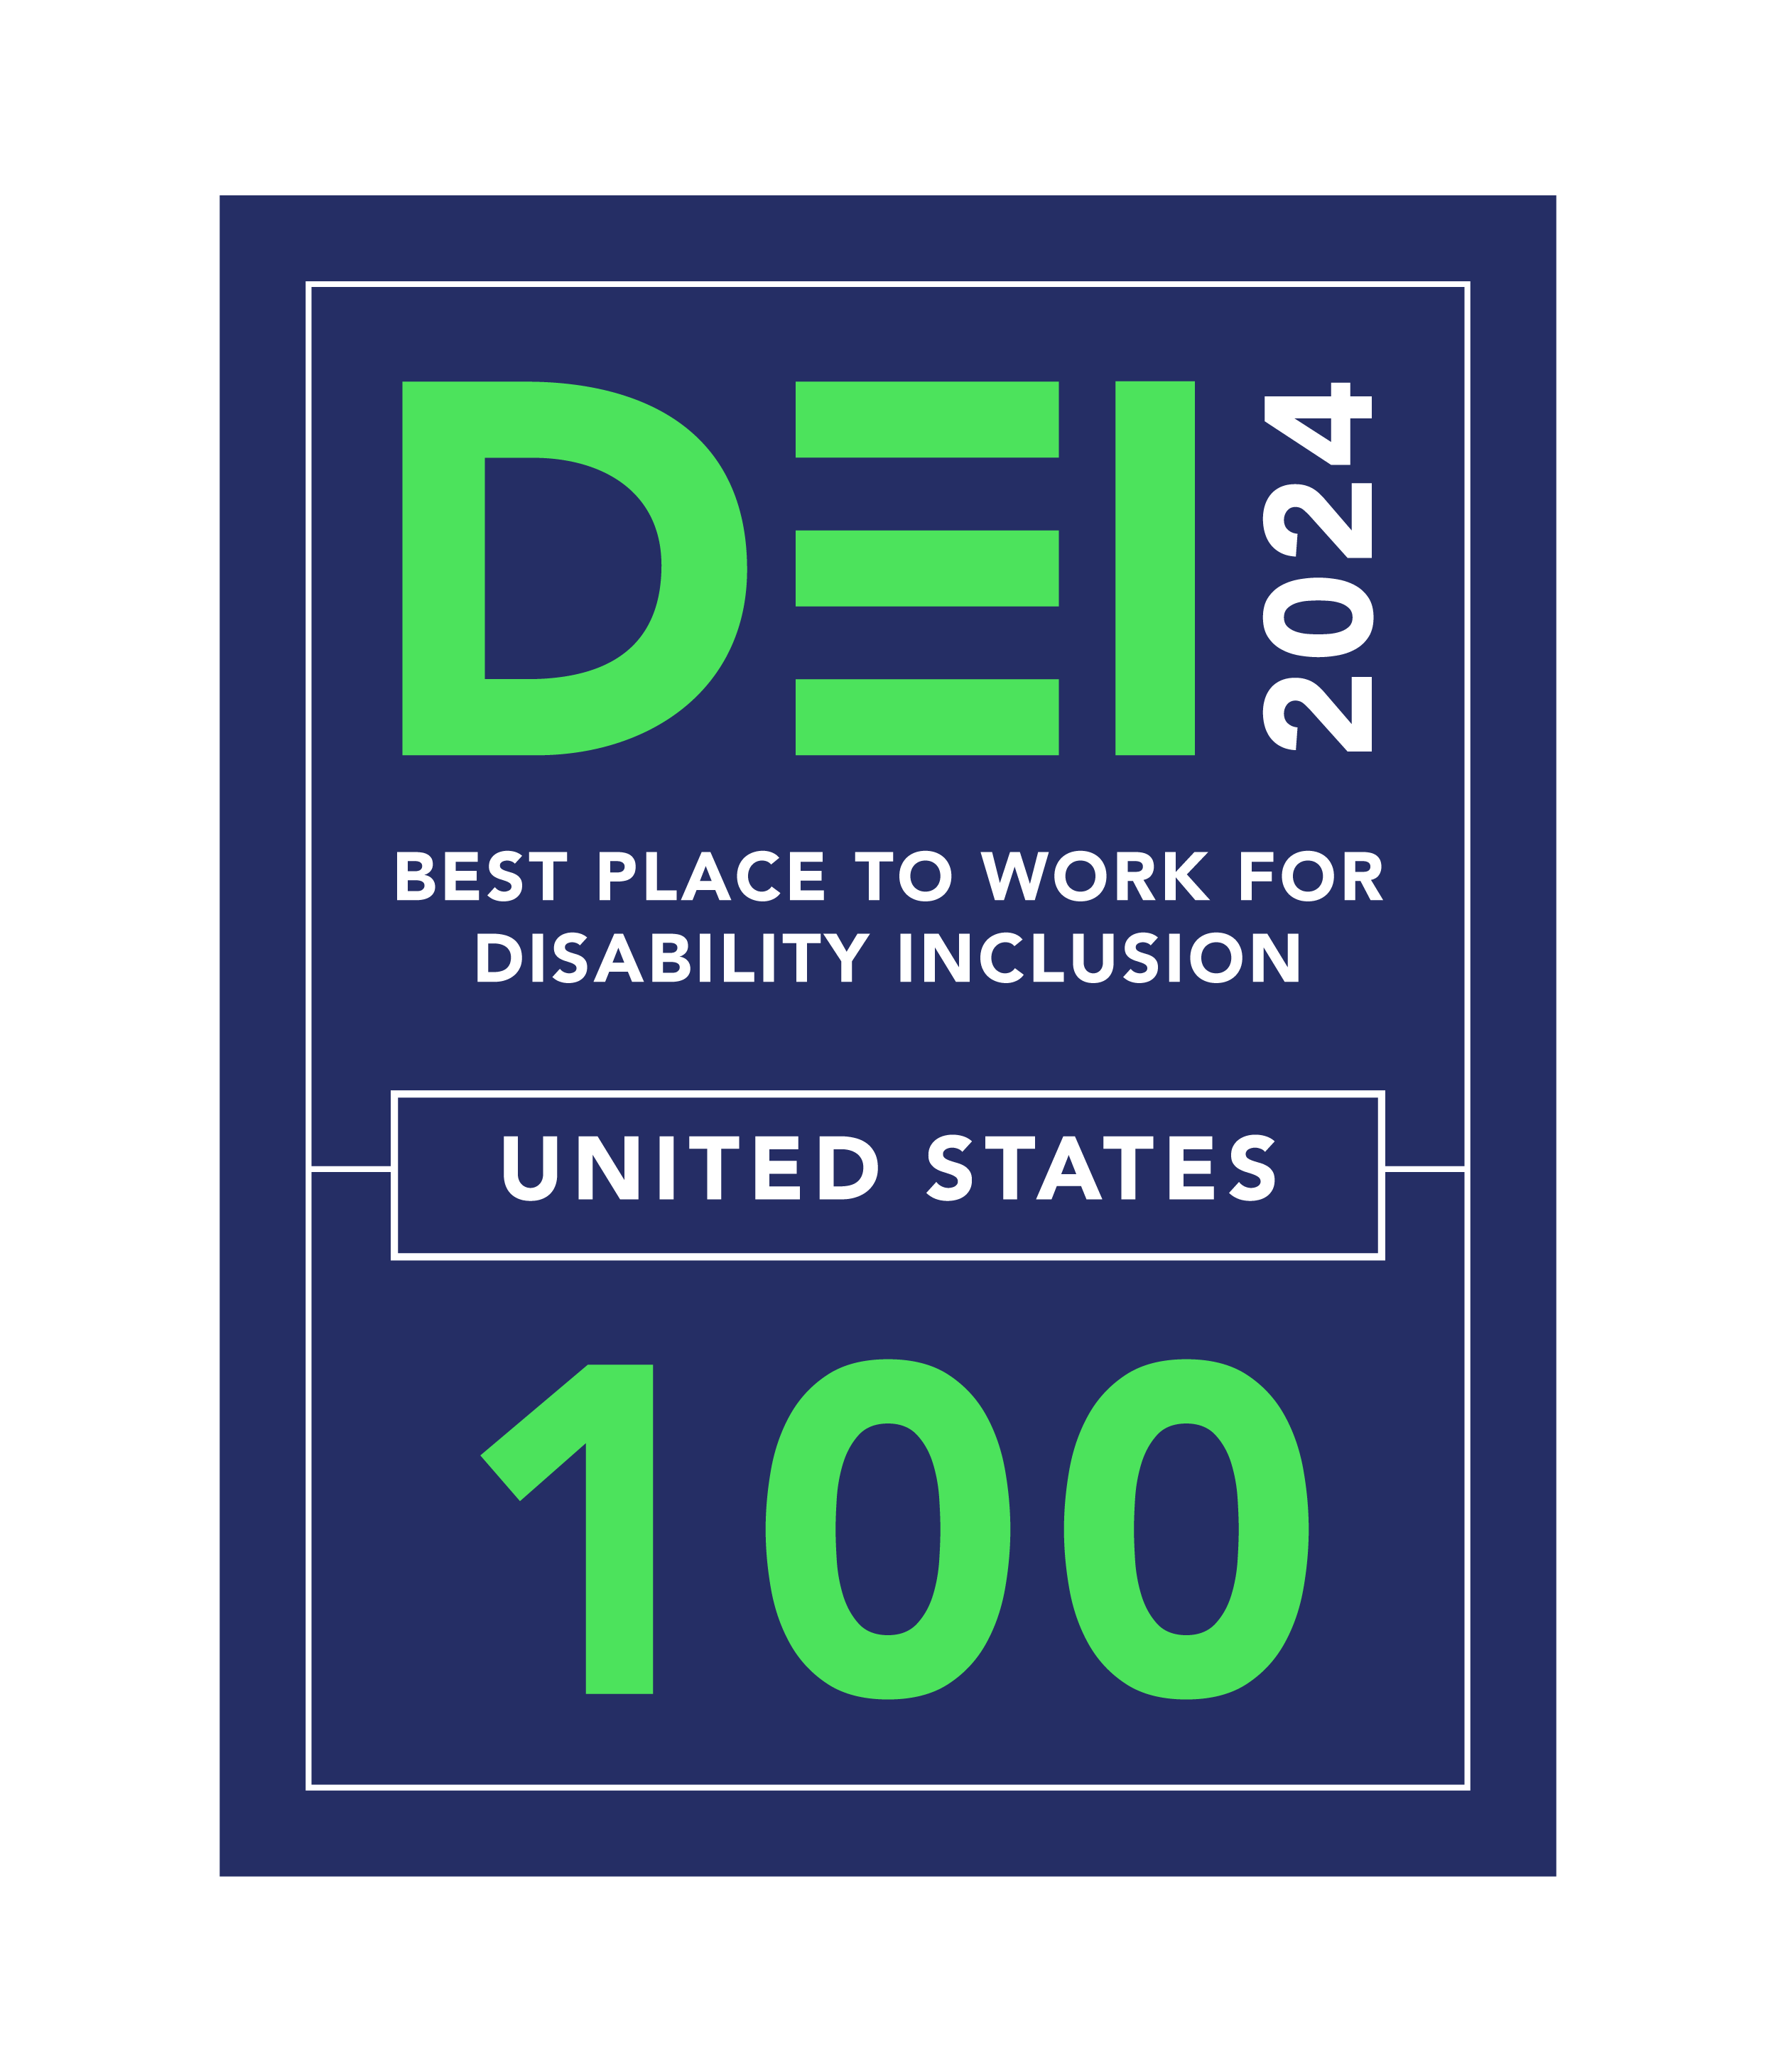 Top 50 employer for disabled